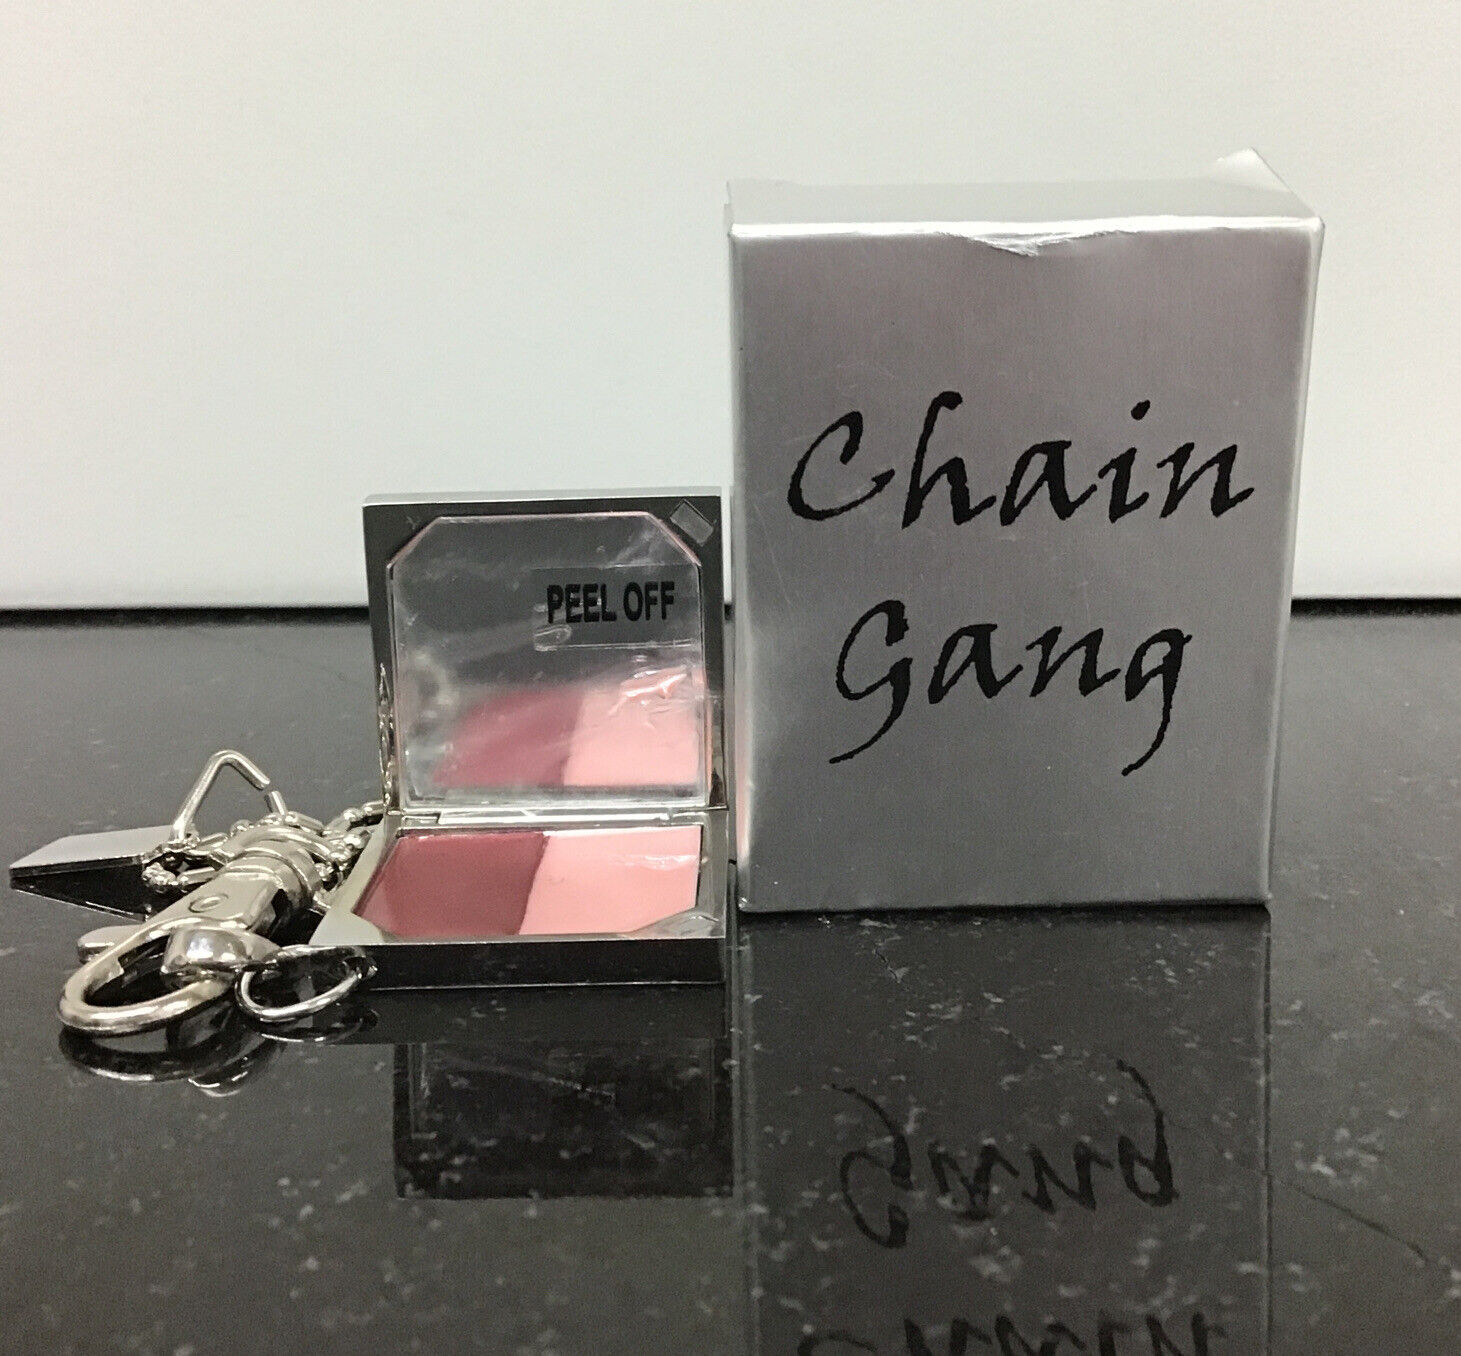 YBF Your Best Friend Lip Gloss Chain Gang 0.028 oz, Condition As Pictured